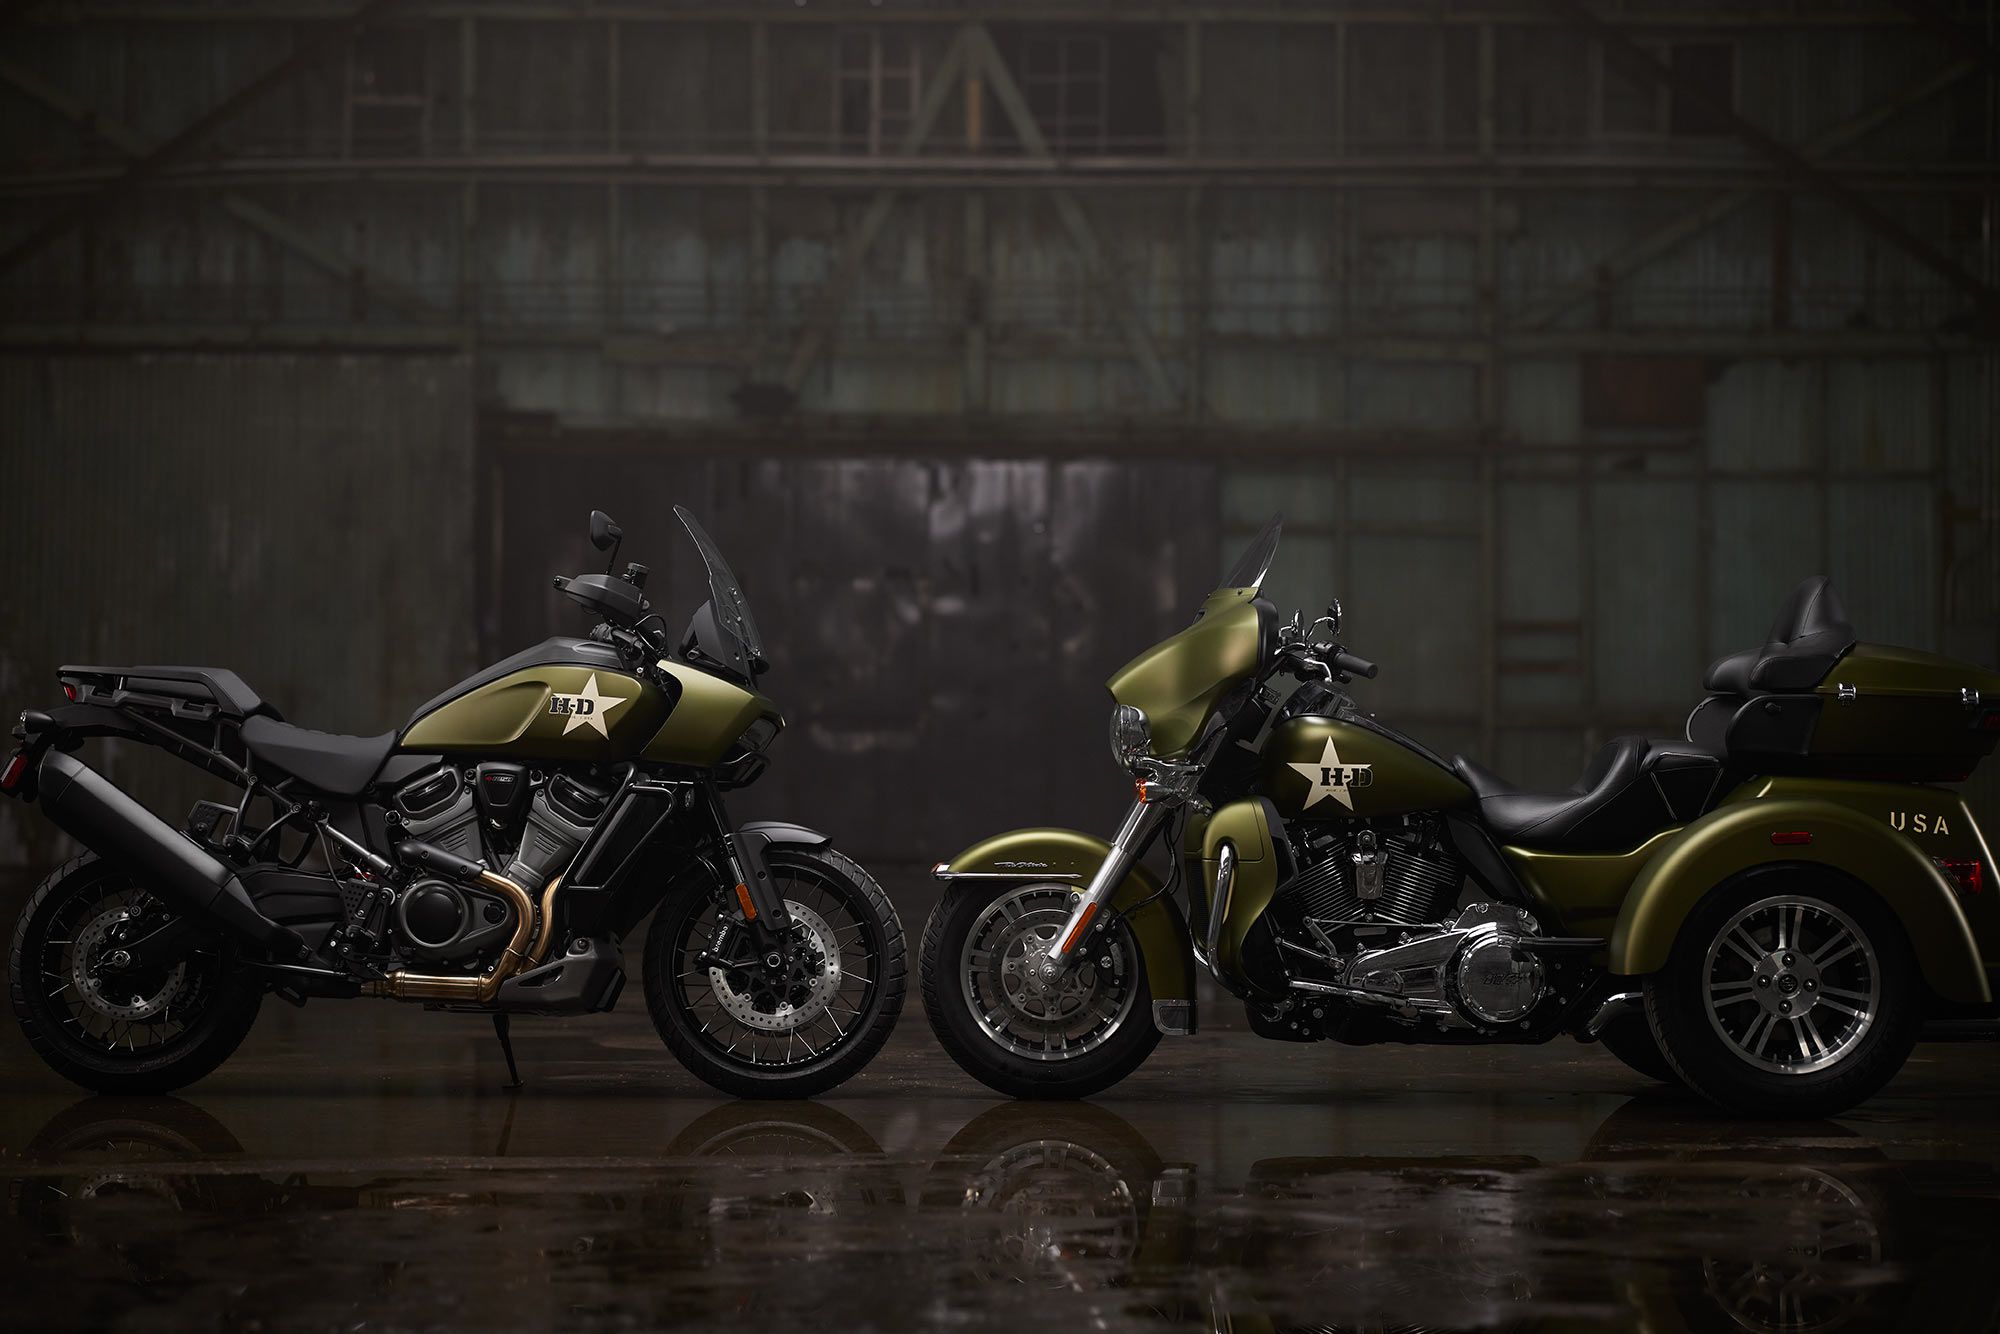 These two Harley-Davidson models look ready for battle and are awesome tributes to the US armed forces.